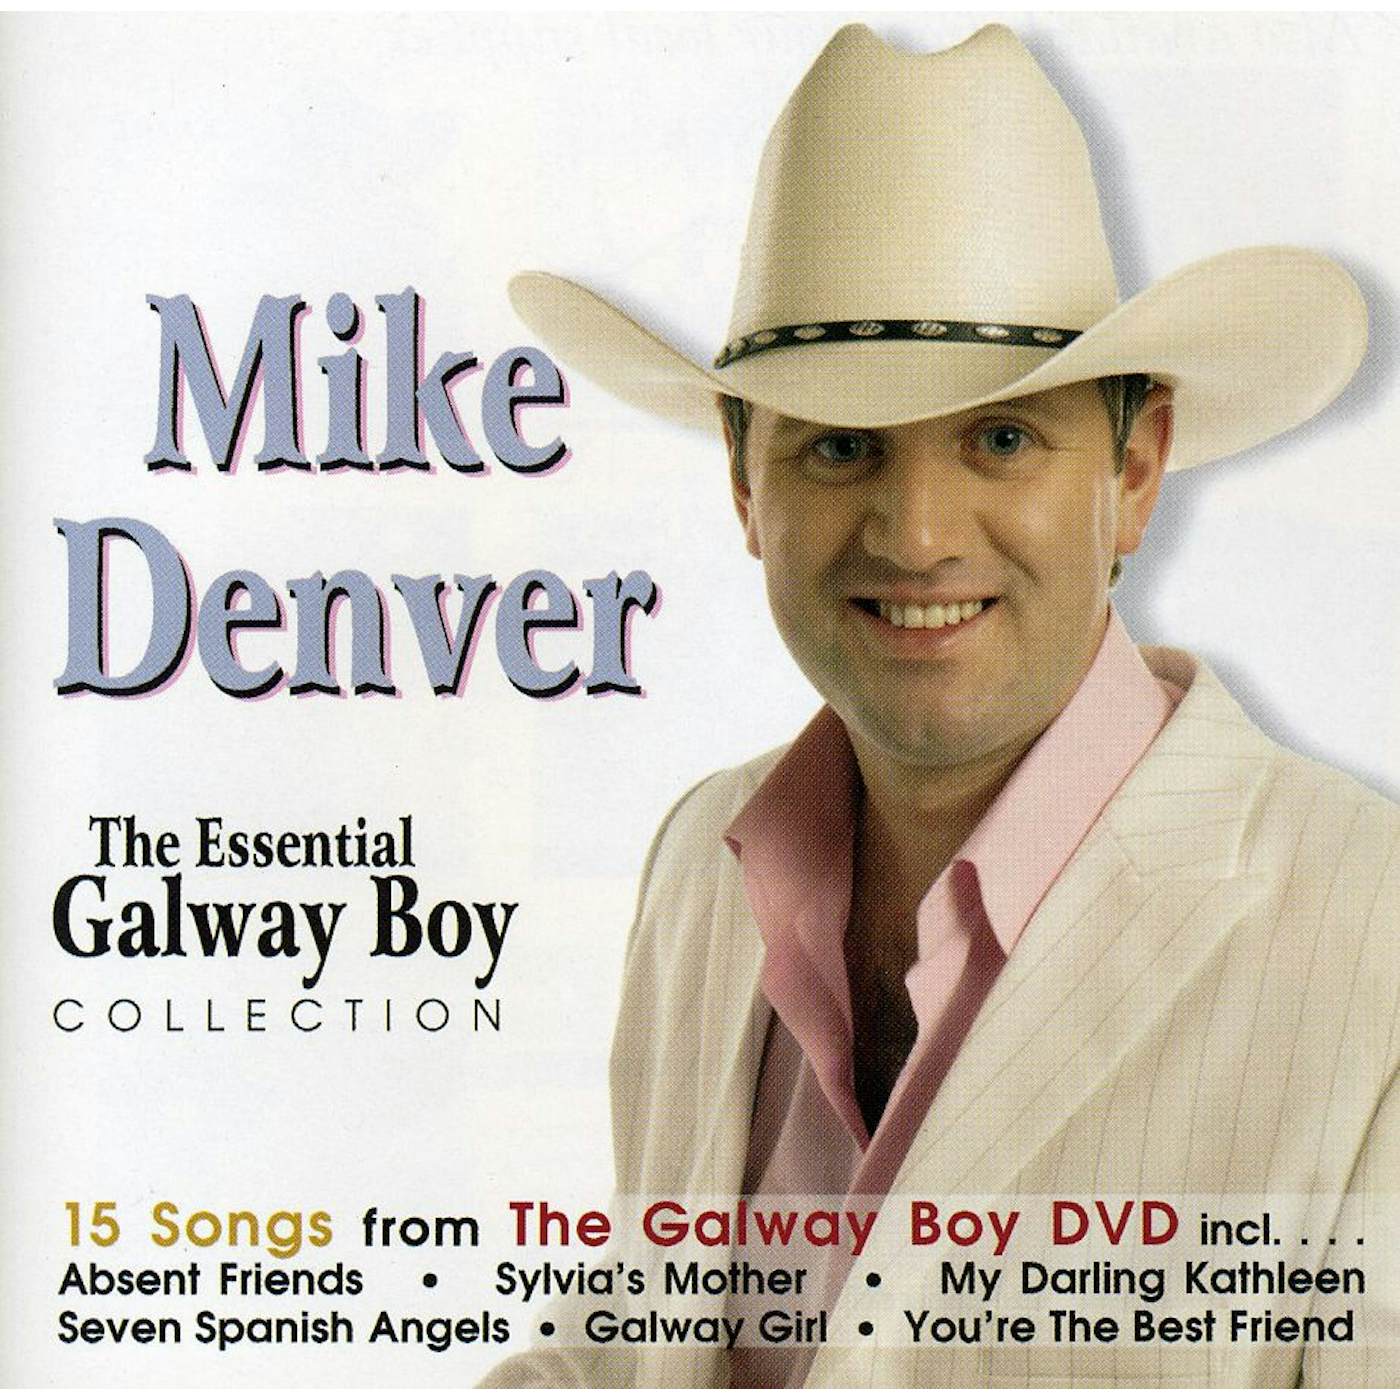 Mike Denver ESSENTIAL GALWAY BOY COLLECTION CD